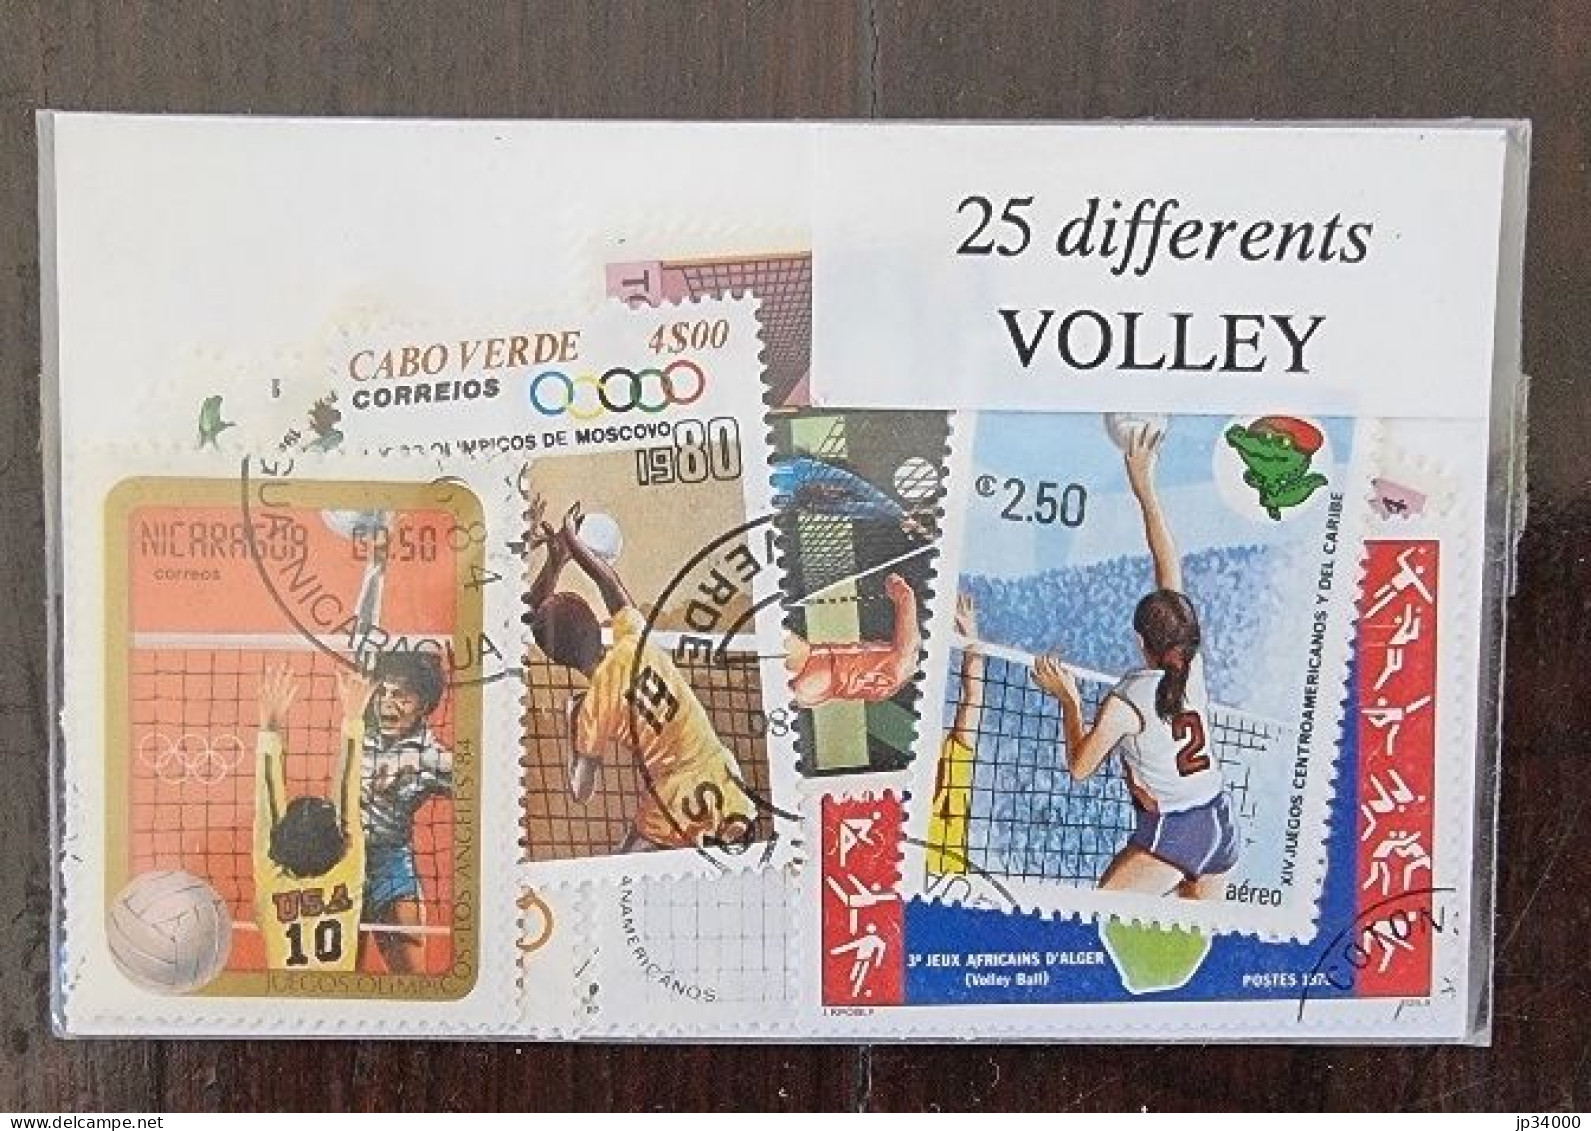 VOLLEY BALL Lot De 25 Timbres Poste Tous Differents. Satisfaction Assurée - Volley-Ball